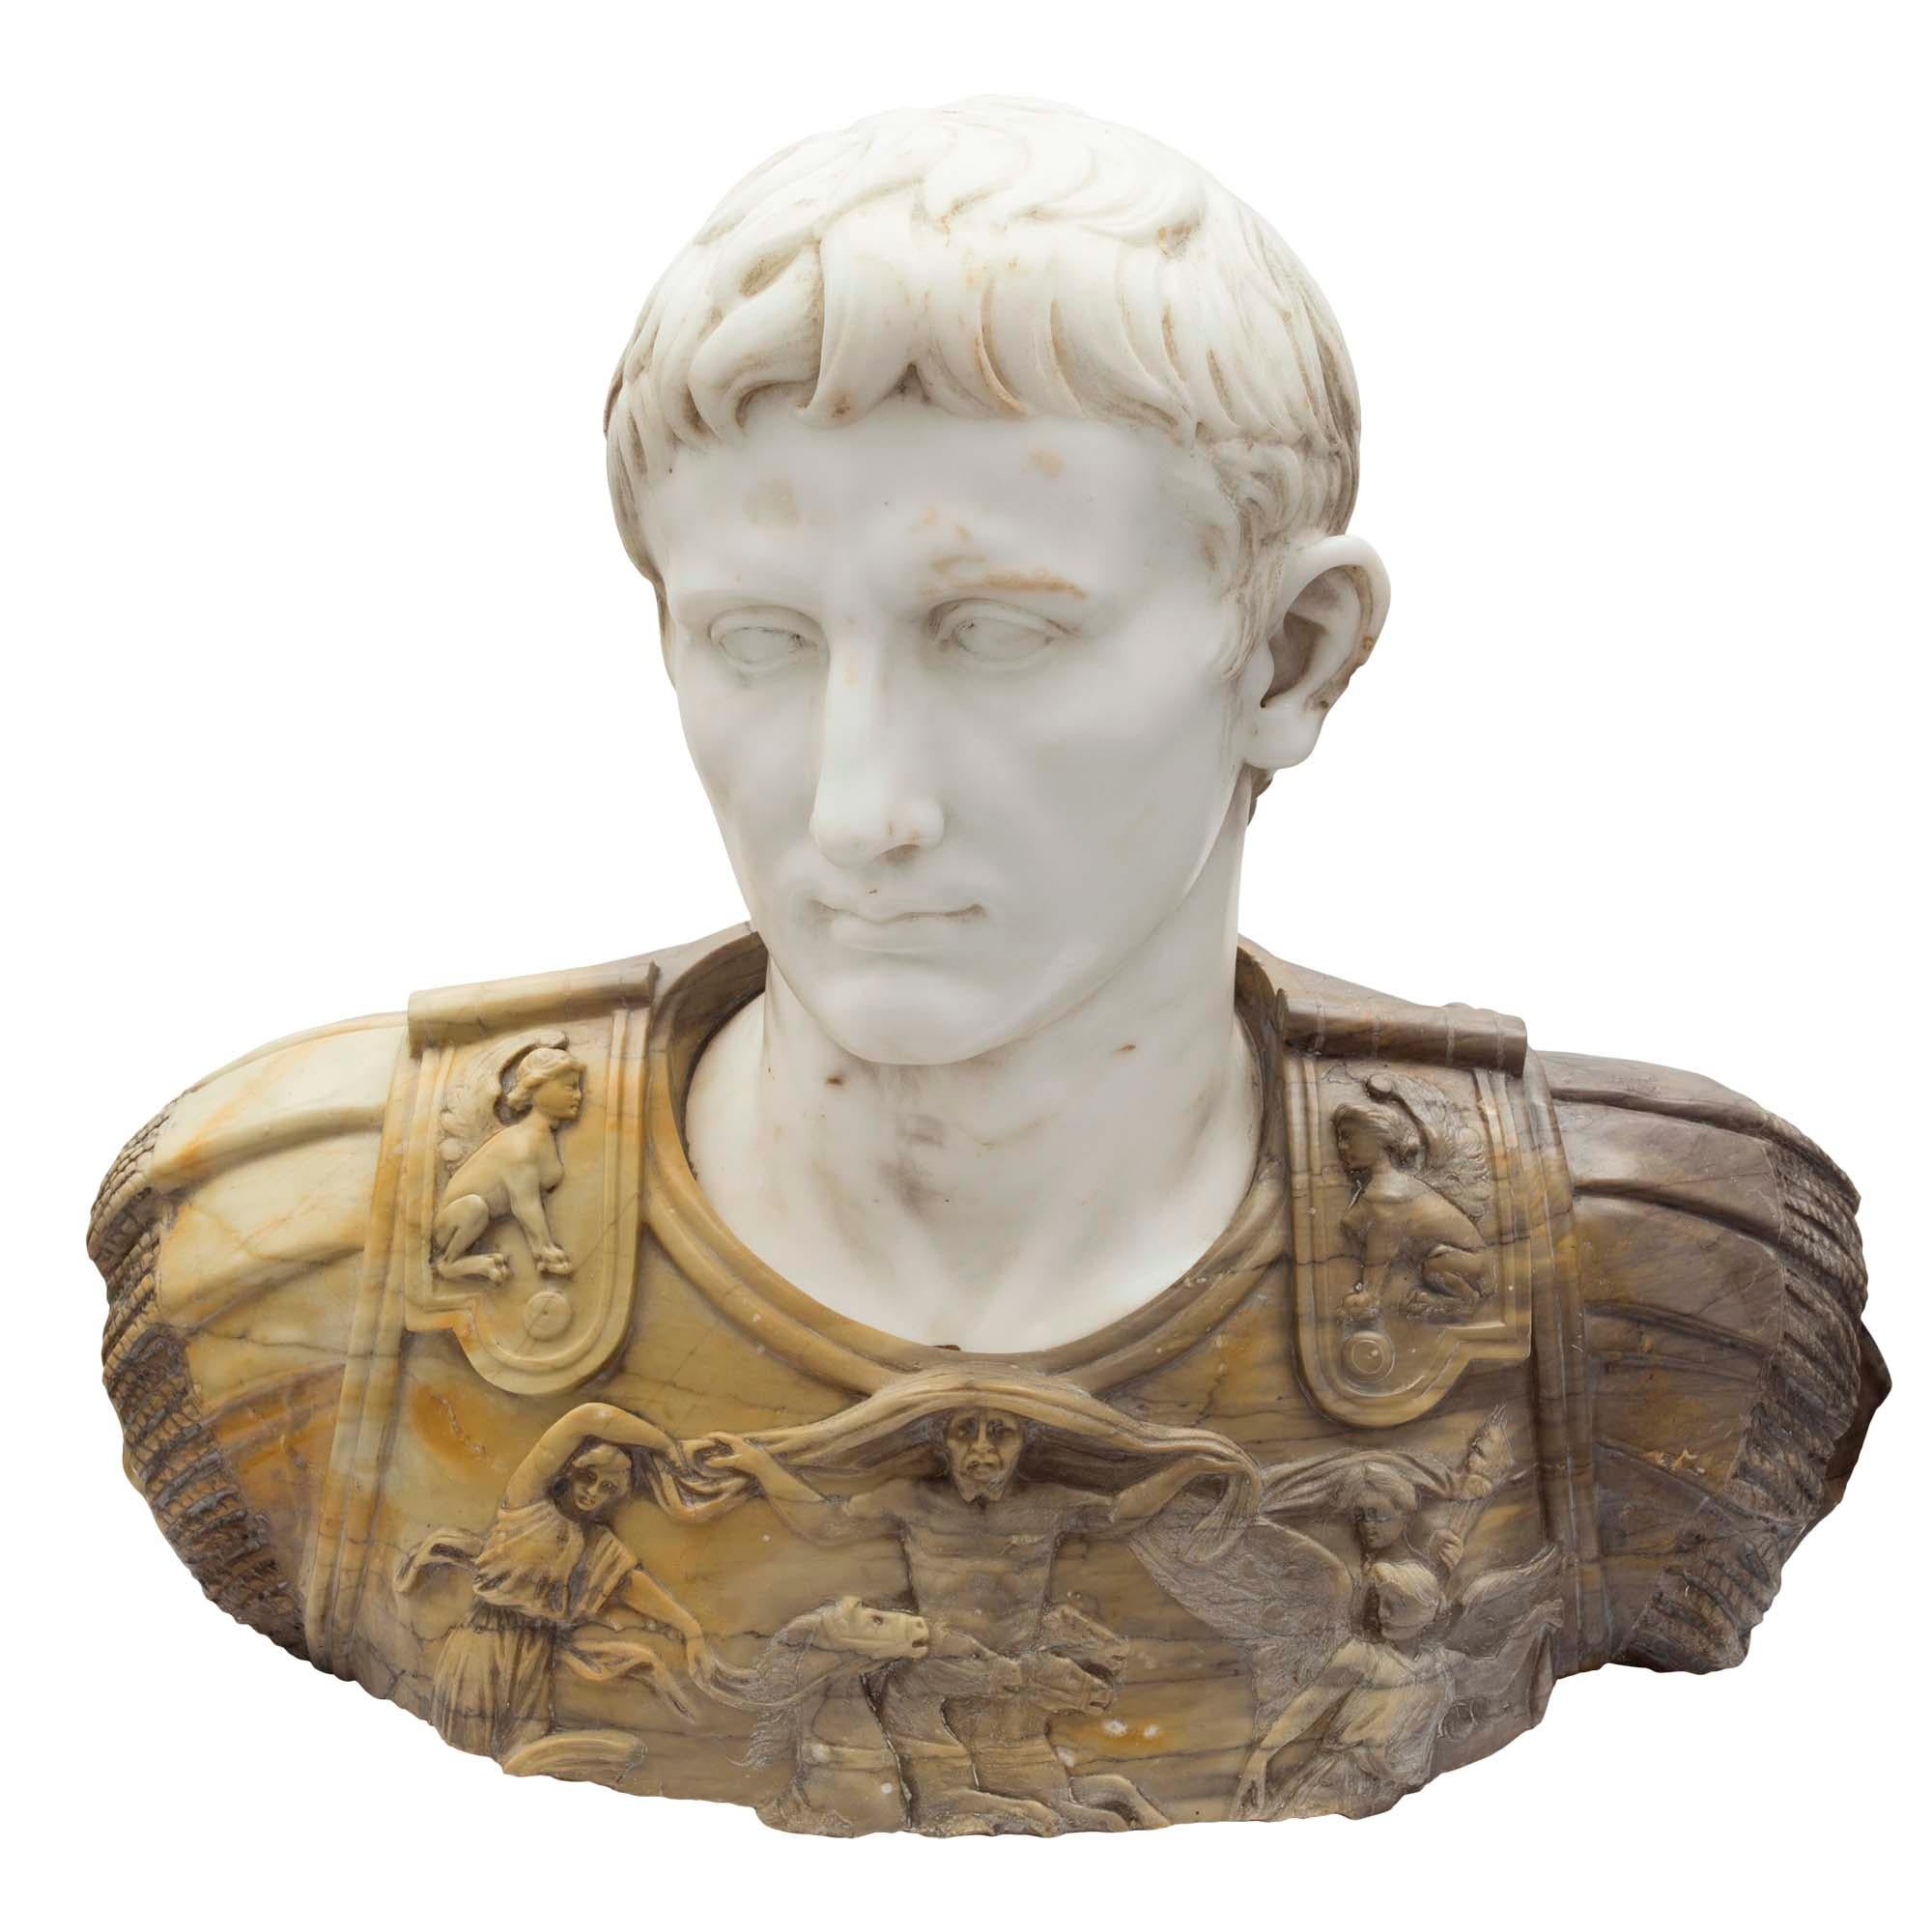 A handsome and extremely high quality Italian early 19th century white Carrara marble and Siena marble bust of Augustus of Prima Porta. The wonderfully detailed Augustus of Prima Porta displays a richly carved Siena marble armor with wonderful